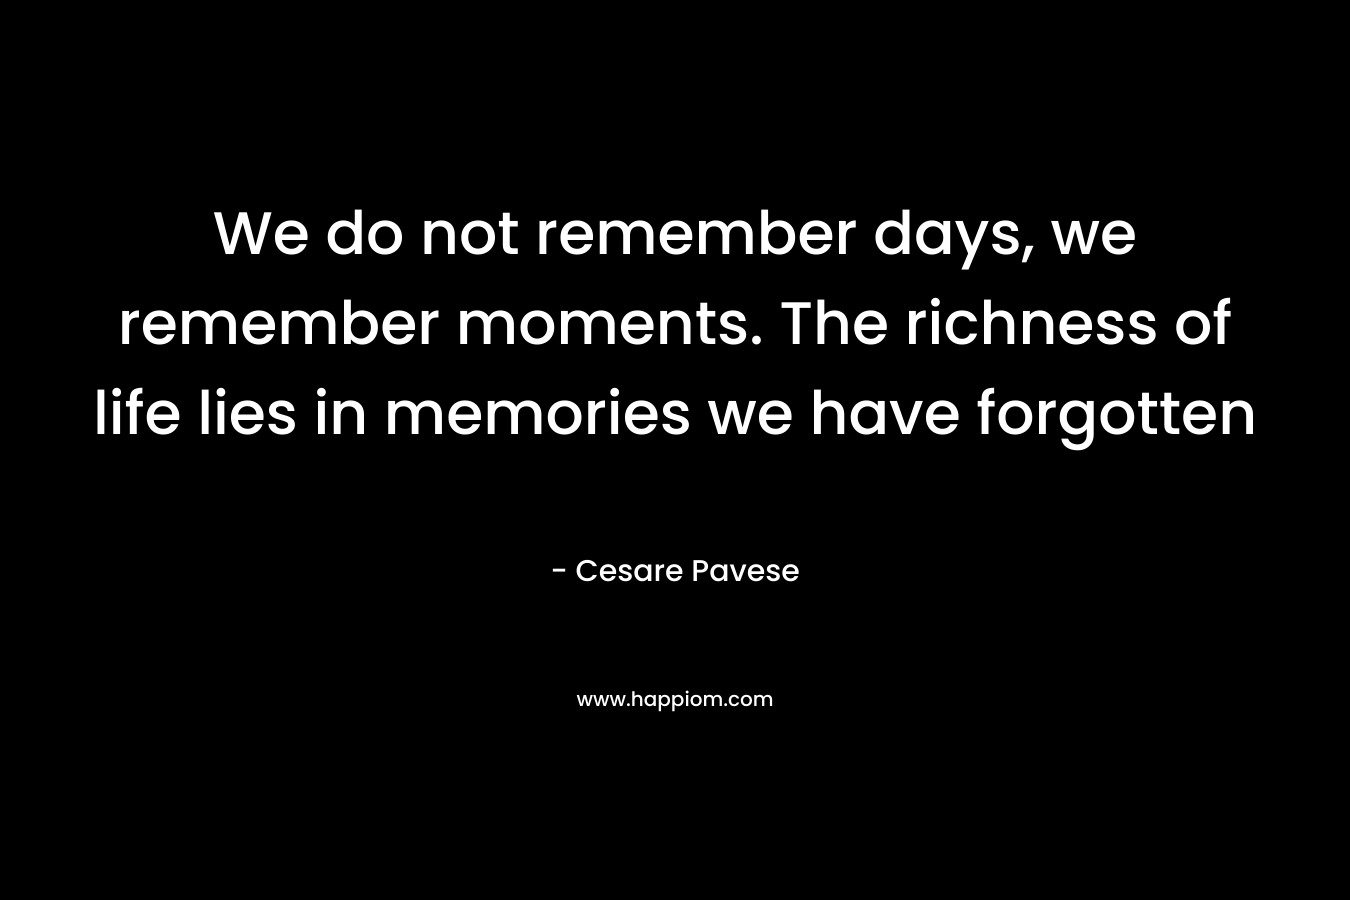 We do not remember days, we remember moments. The richness of life lies in memories we have forgotten – Cesare Pavese